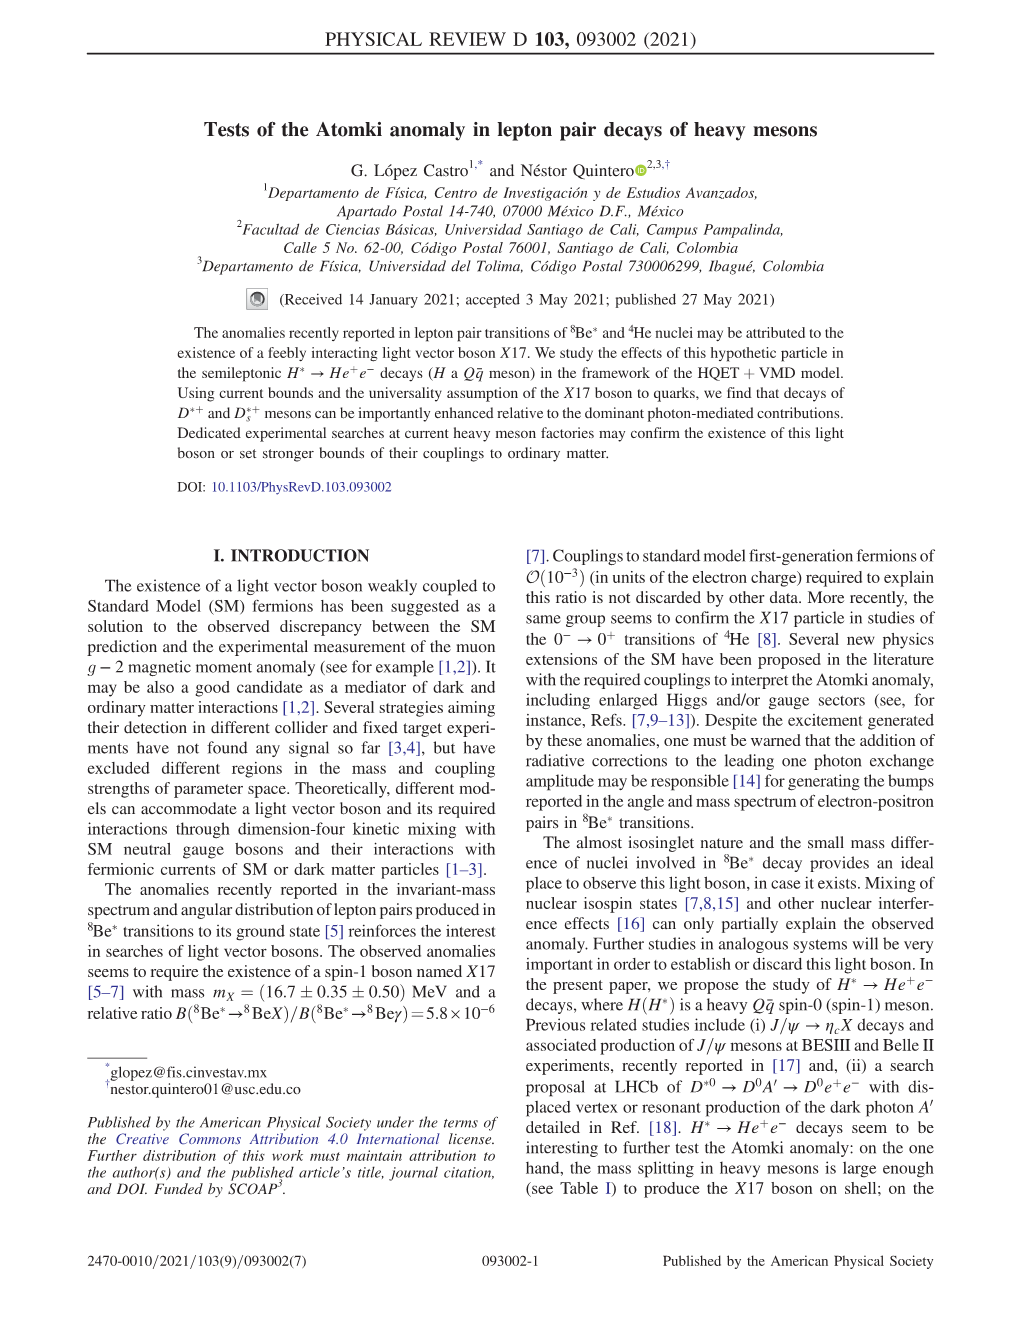 Tests of the Atomki Anomaly in Lepton Pair Decays of Heavy Mesons